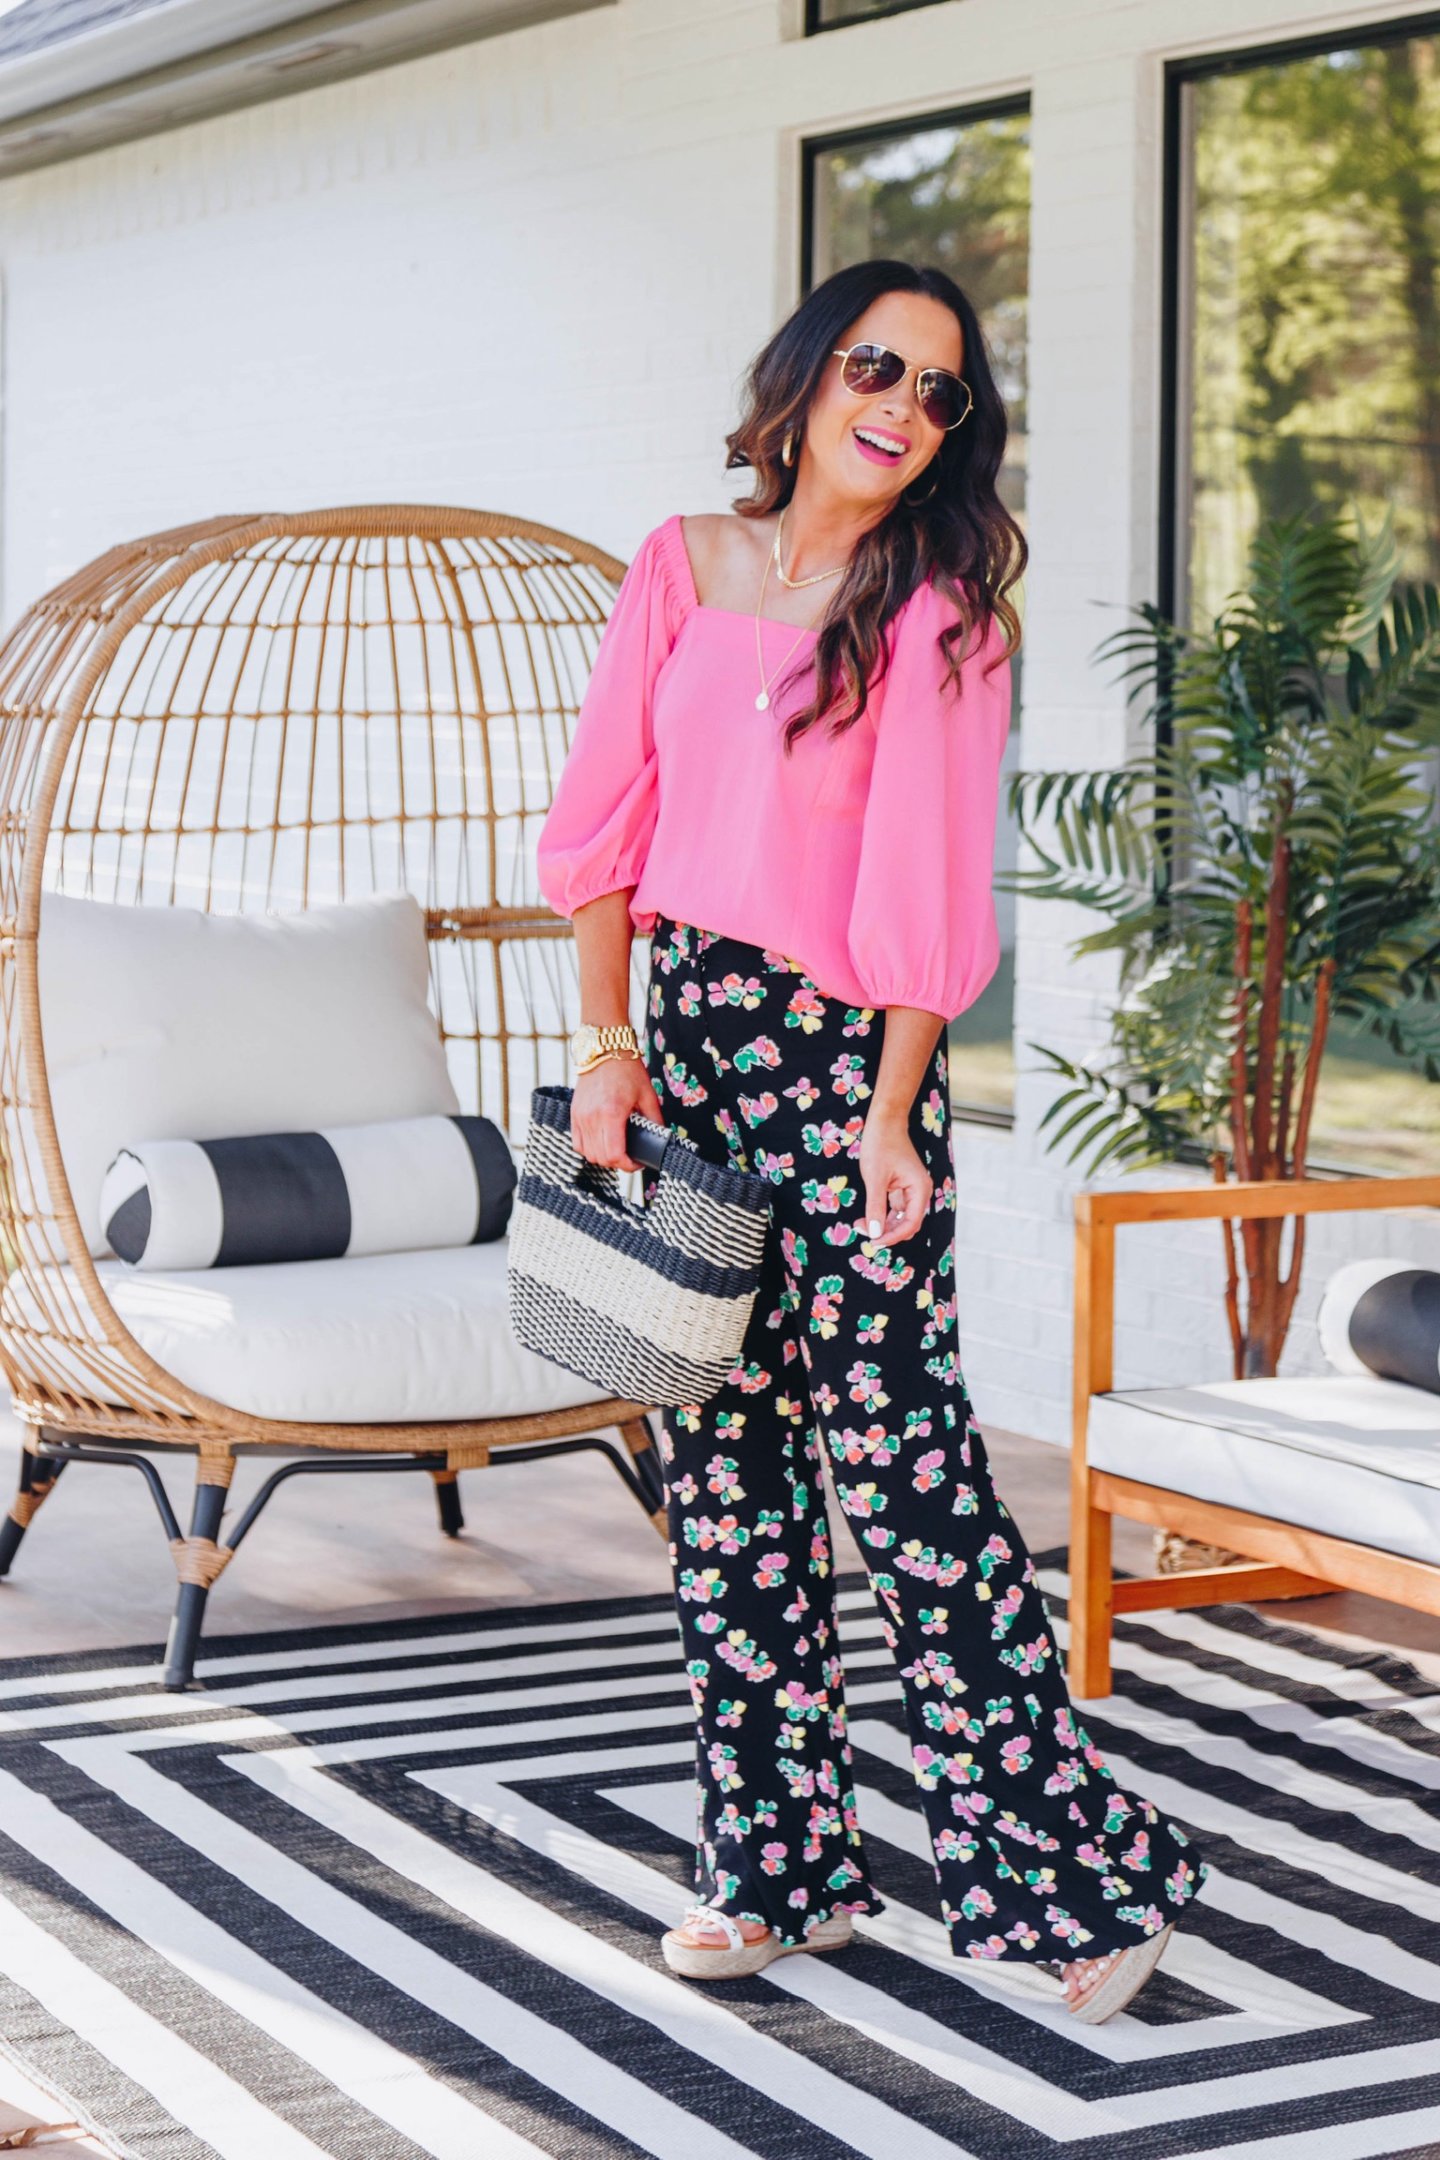 Sister Style: Affordable Spring Trends To Try - The Double Take Girls